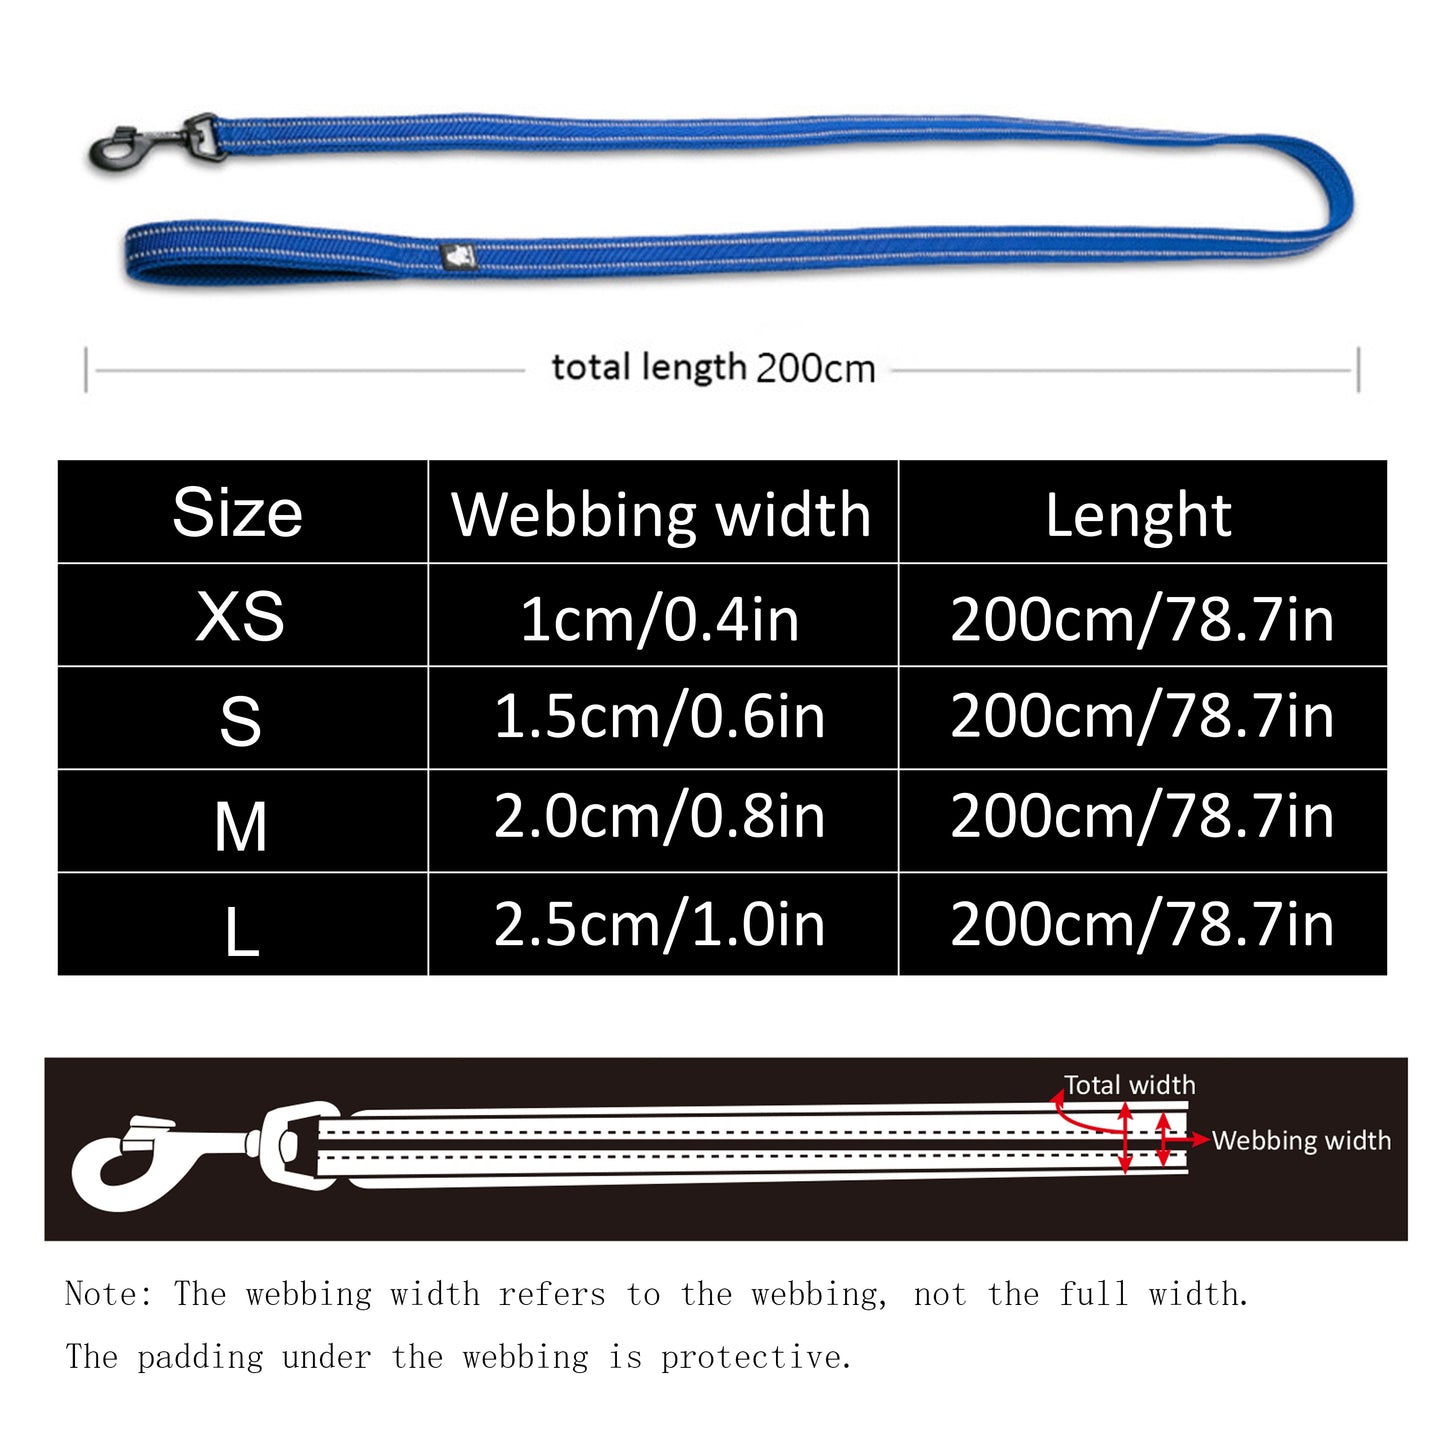 Reflective Mesh Padded Pet Leash: Comfortable Nylon Training Lead for Dogs and Cats - 11 Color Options, 200cm Length